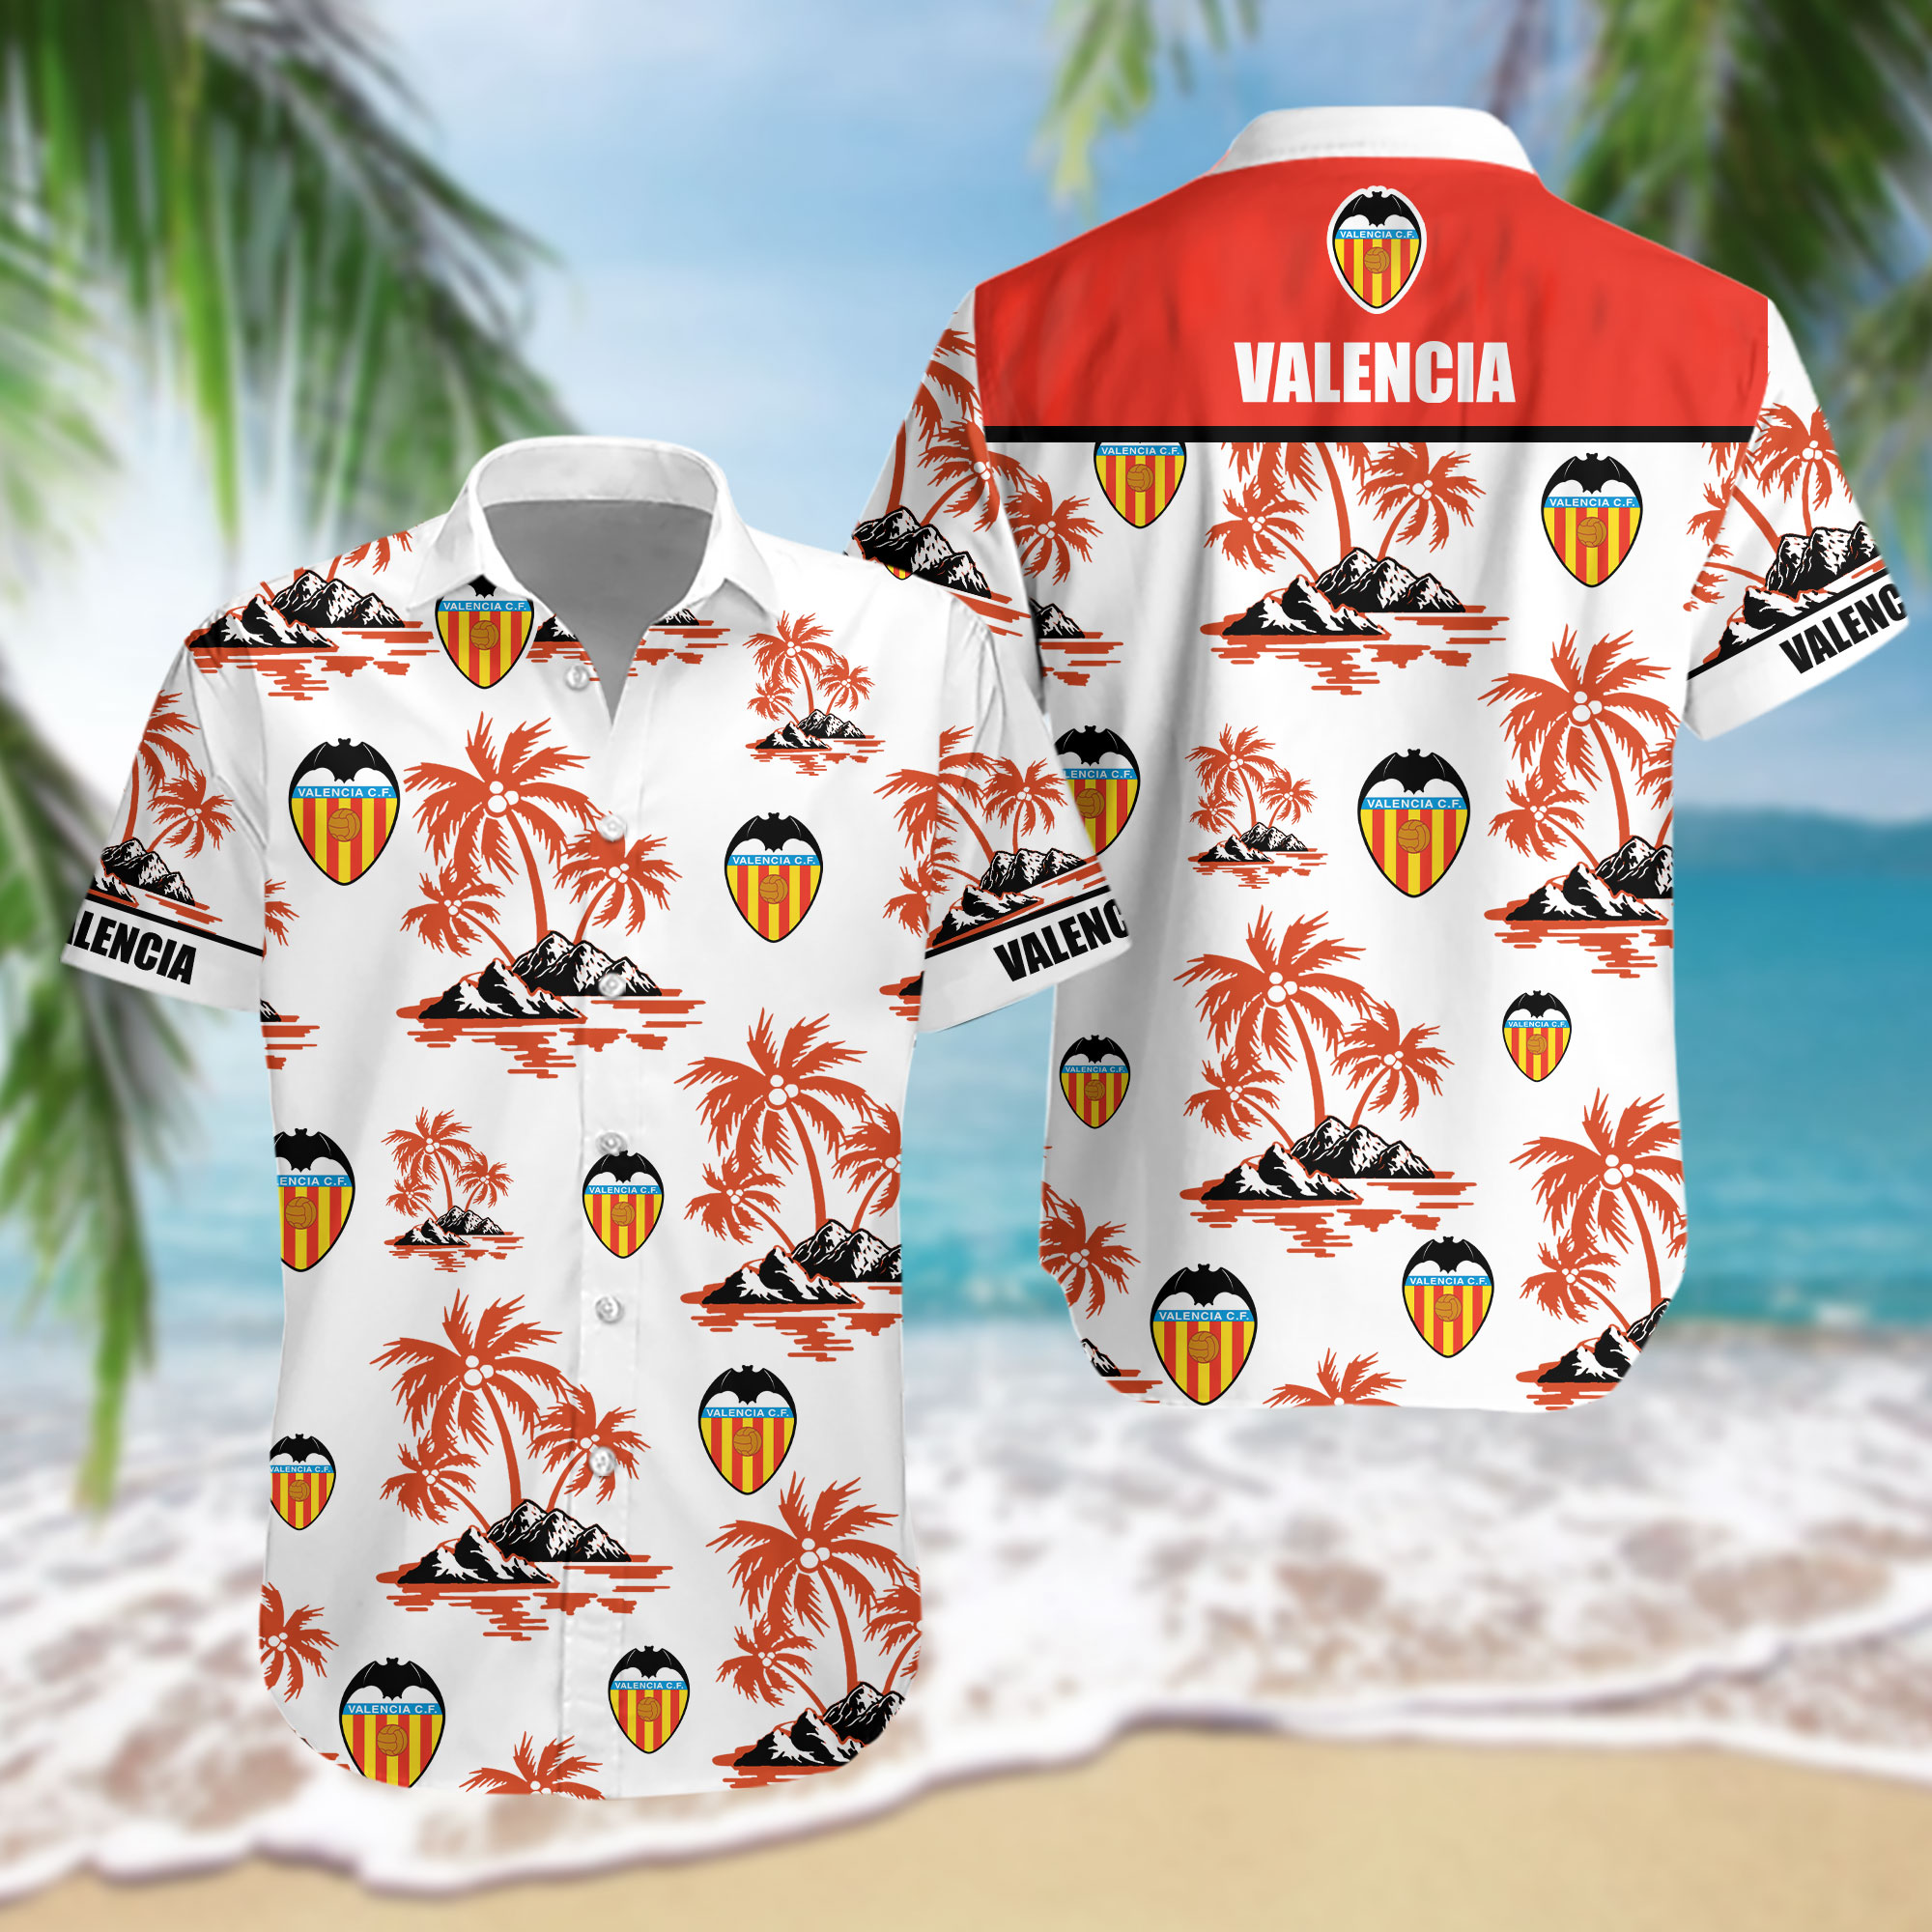 These Hawaiian Shirt will be a great choice for any type of occasion 18